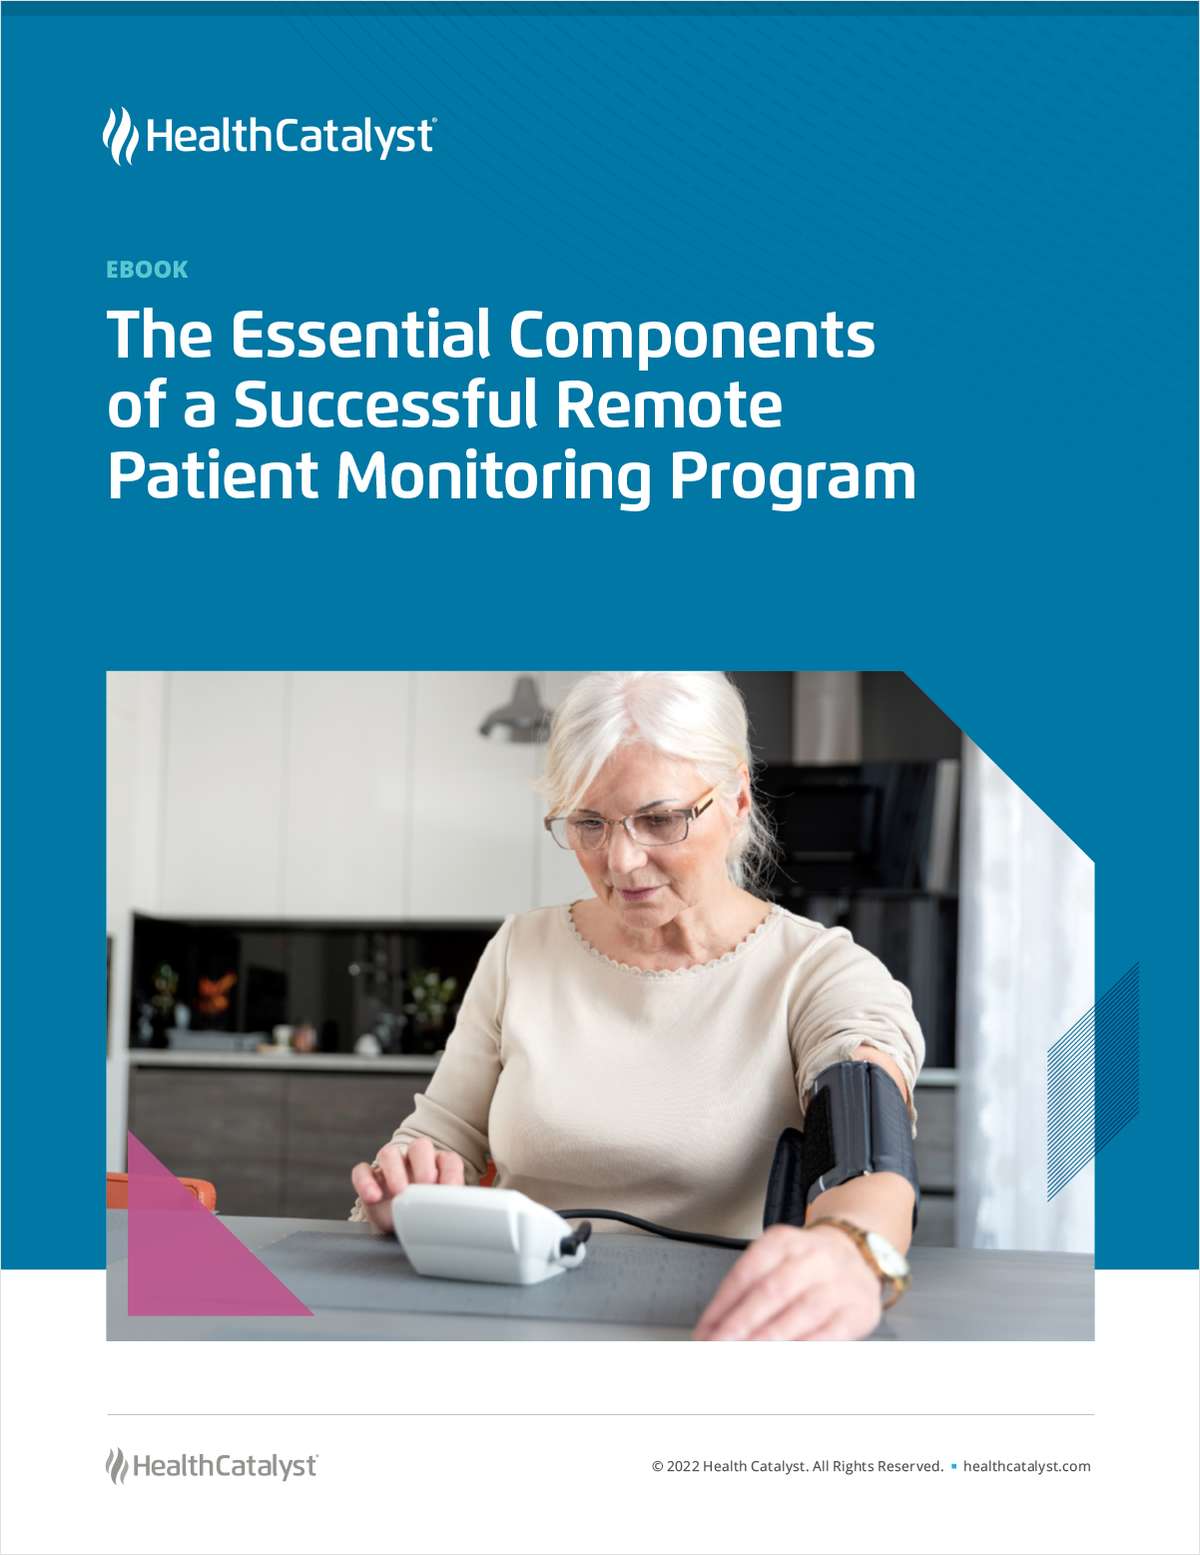 The Essential Components of a Successful Remote Patient Monitoring Program